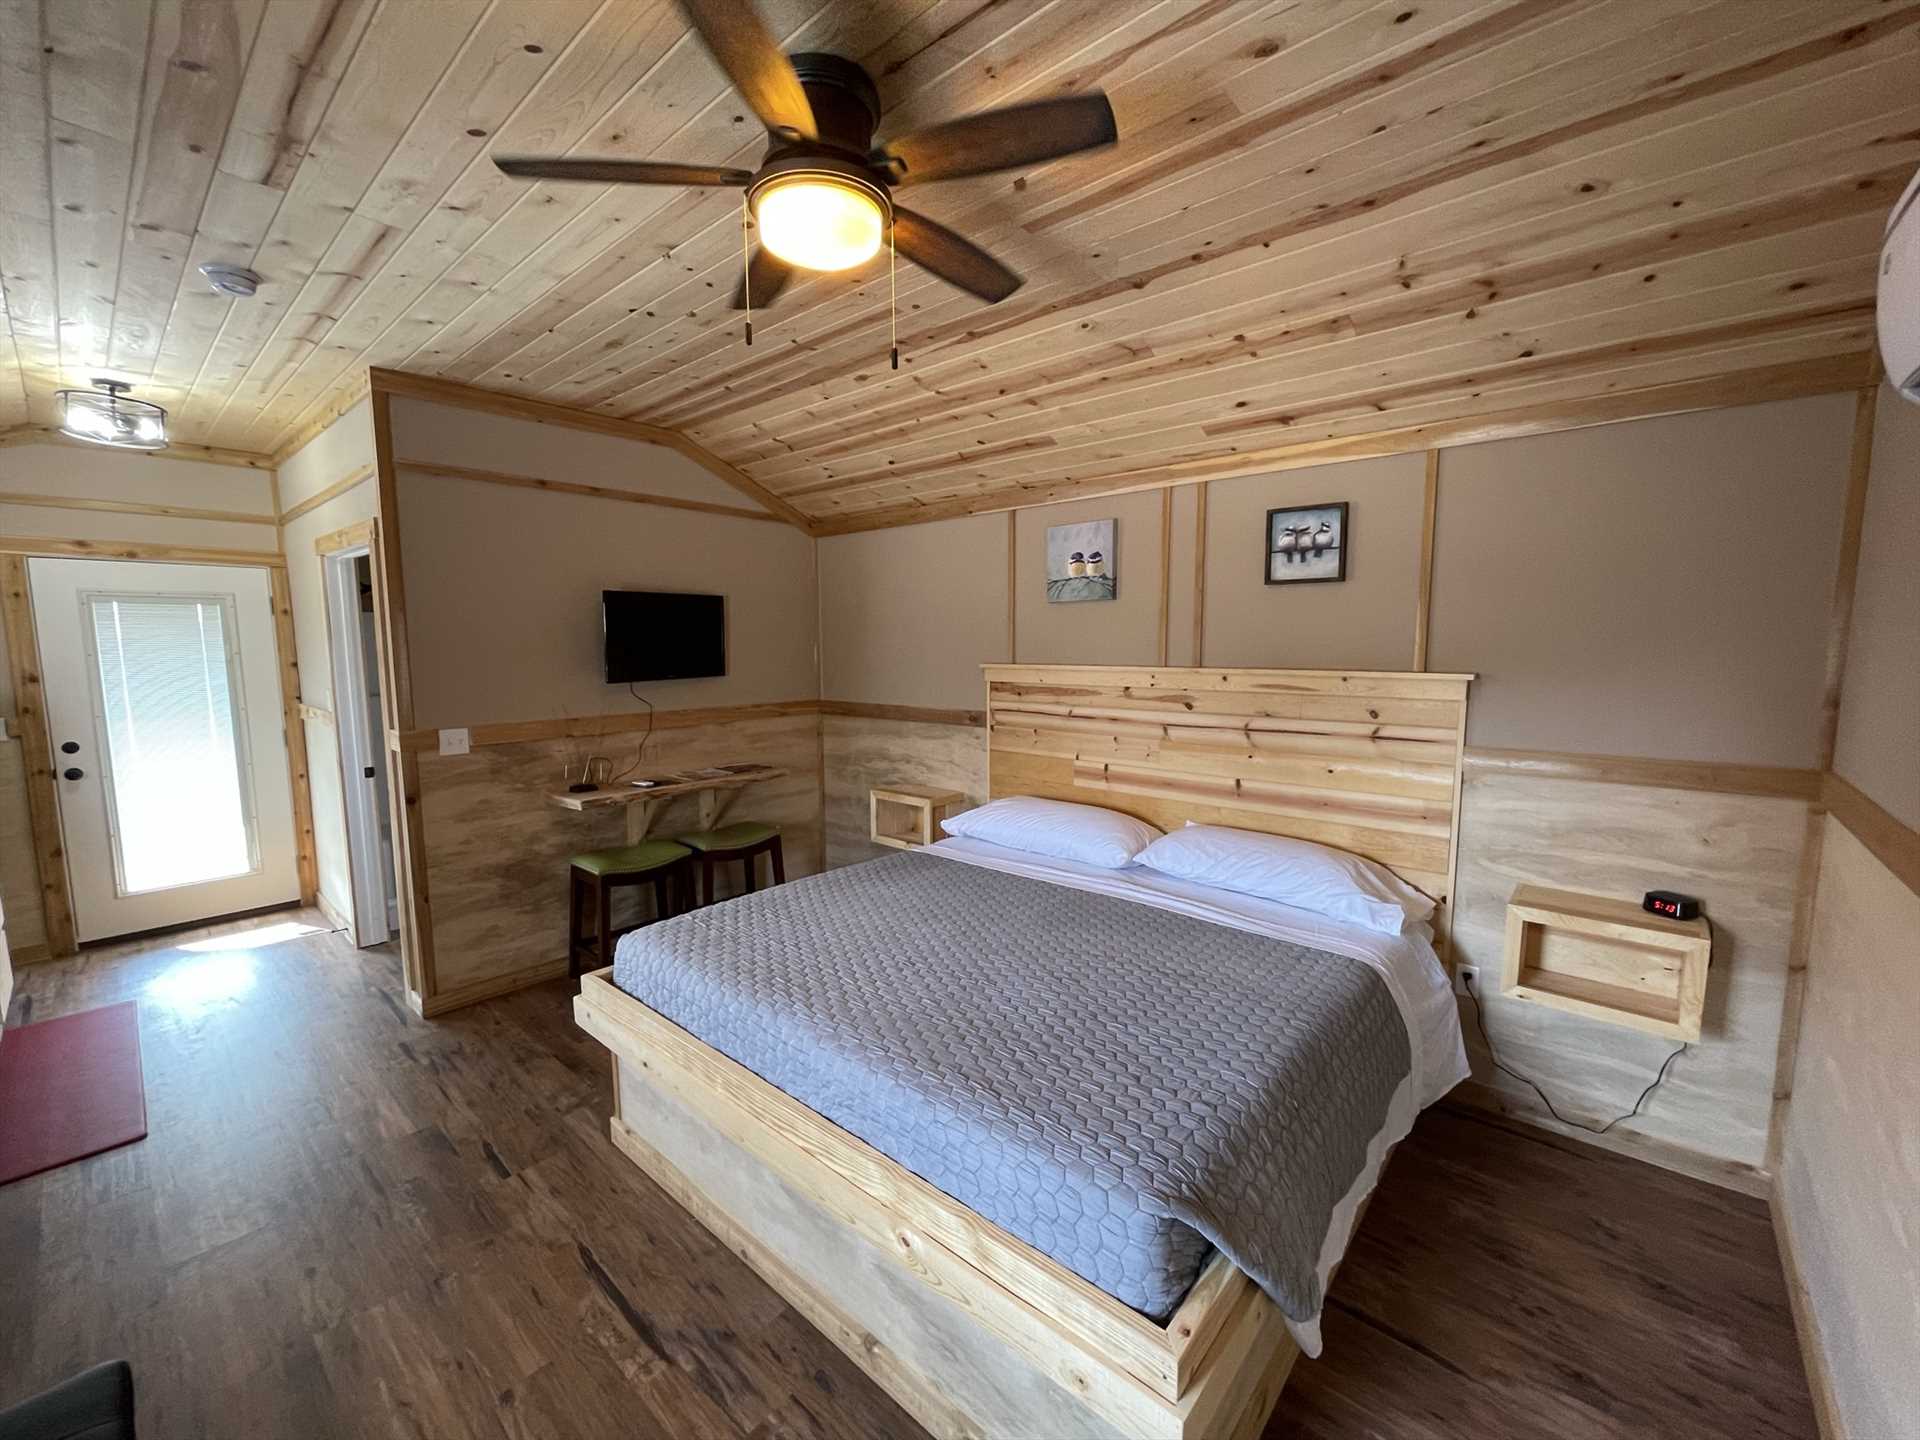                                                 You'll enjoy TV with local channels and Wifi service...and the whole cabin is kept comfy with AC, heat, and ceiling fans!